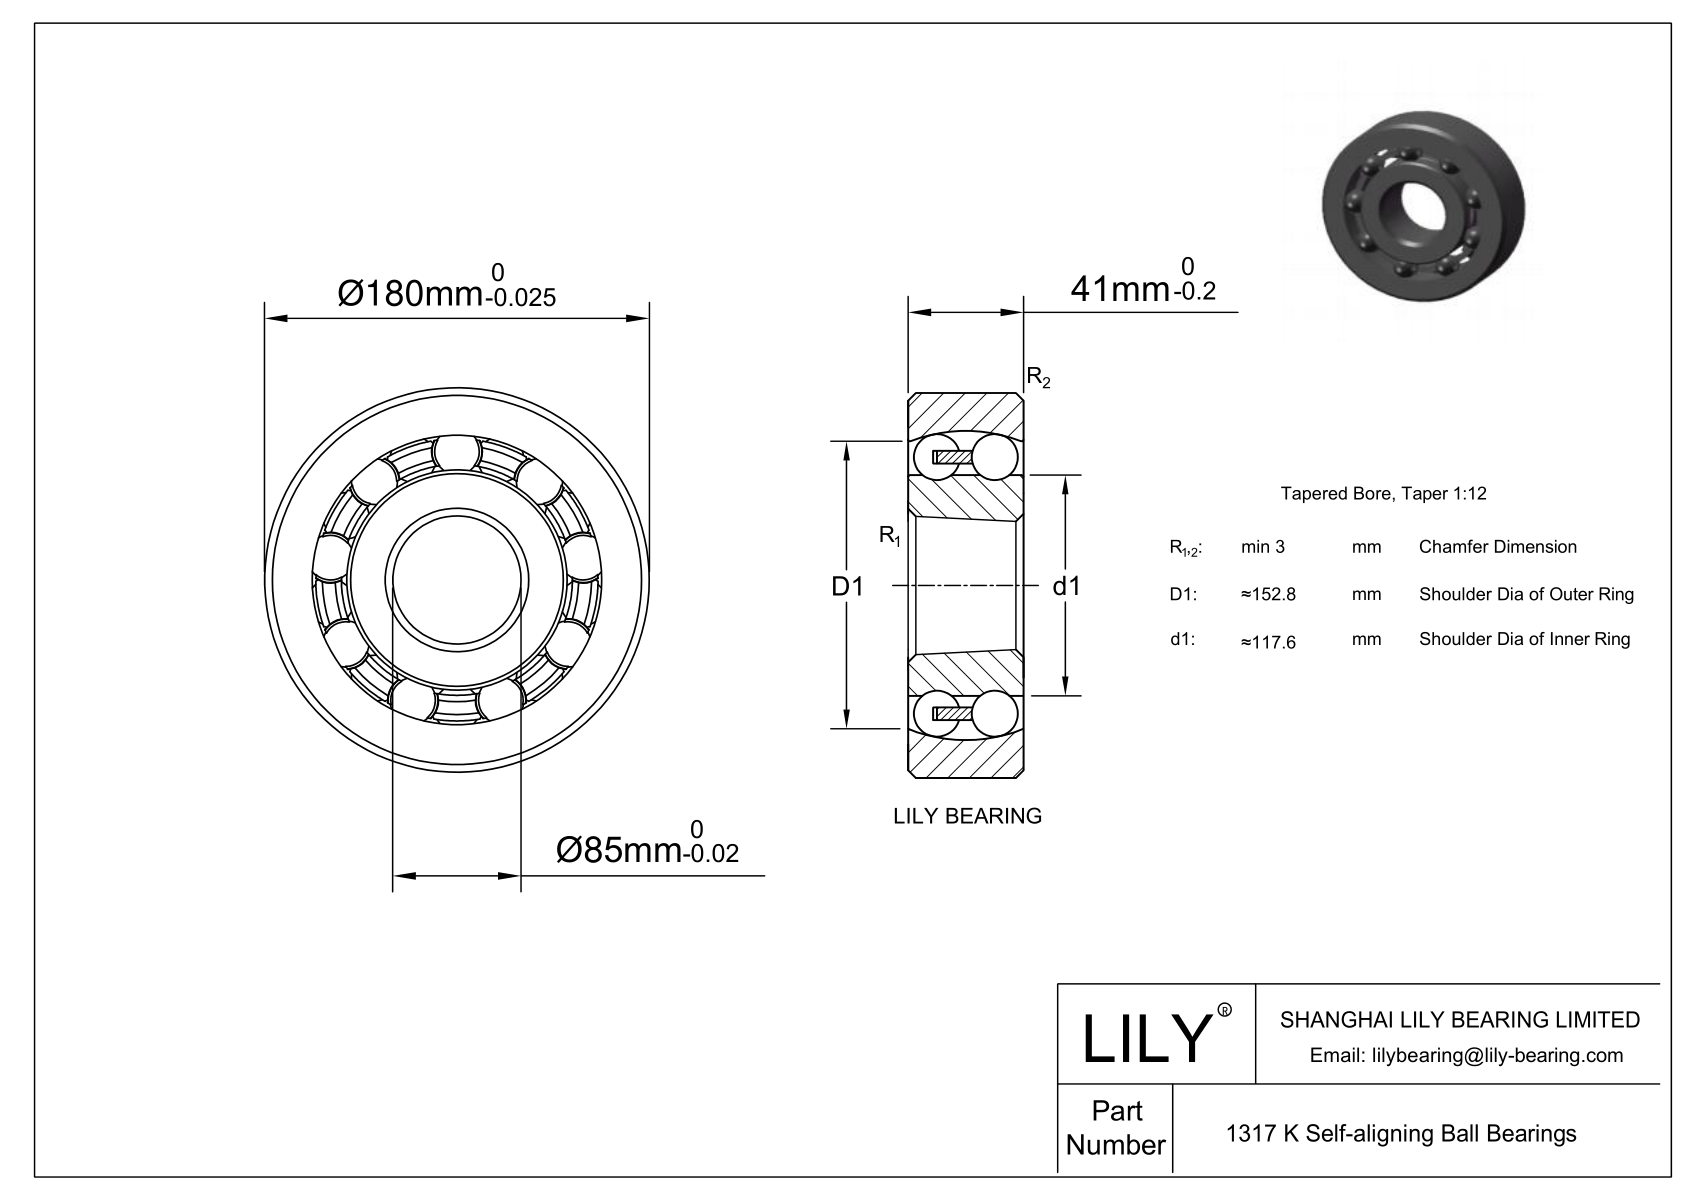 S1317 K Stainless Steel Self Aligning Ball Bearings cad drawing